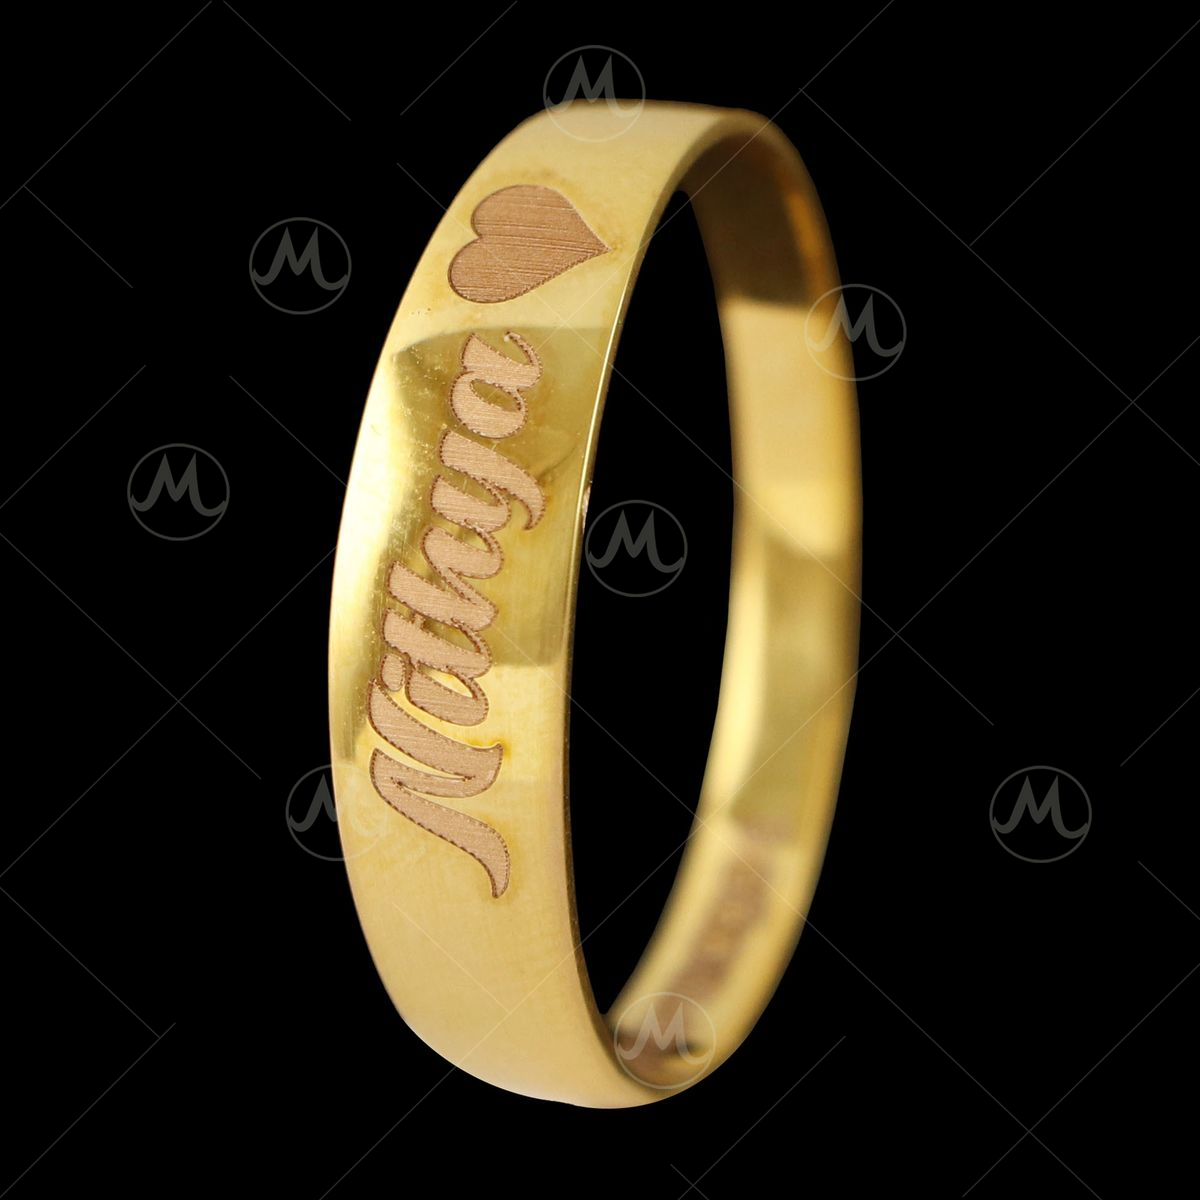 Men's Custom Name Ring Yellow Gold Plated 925 Silver | eBay